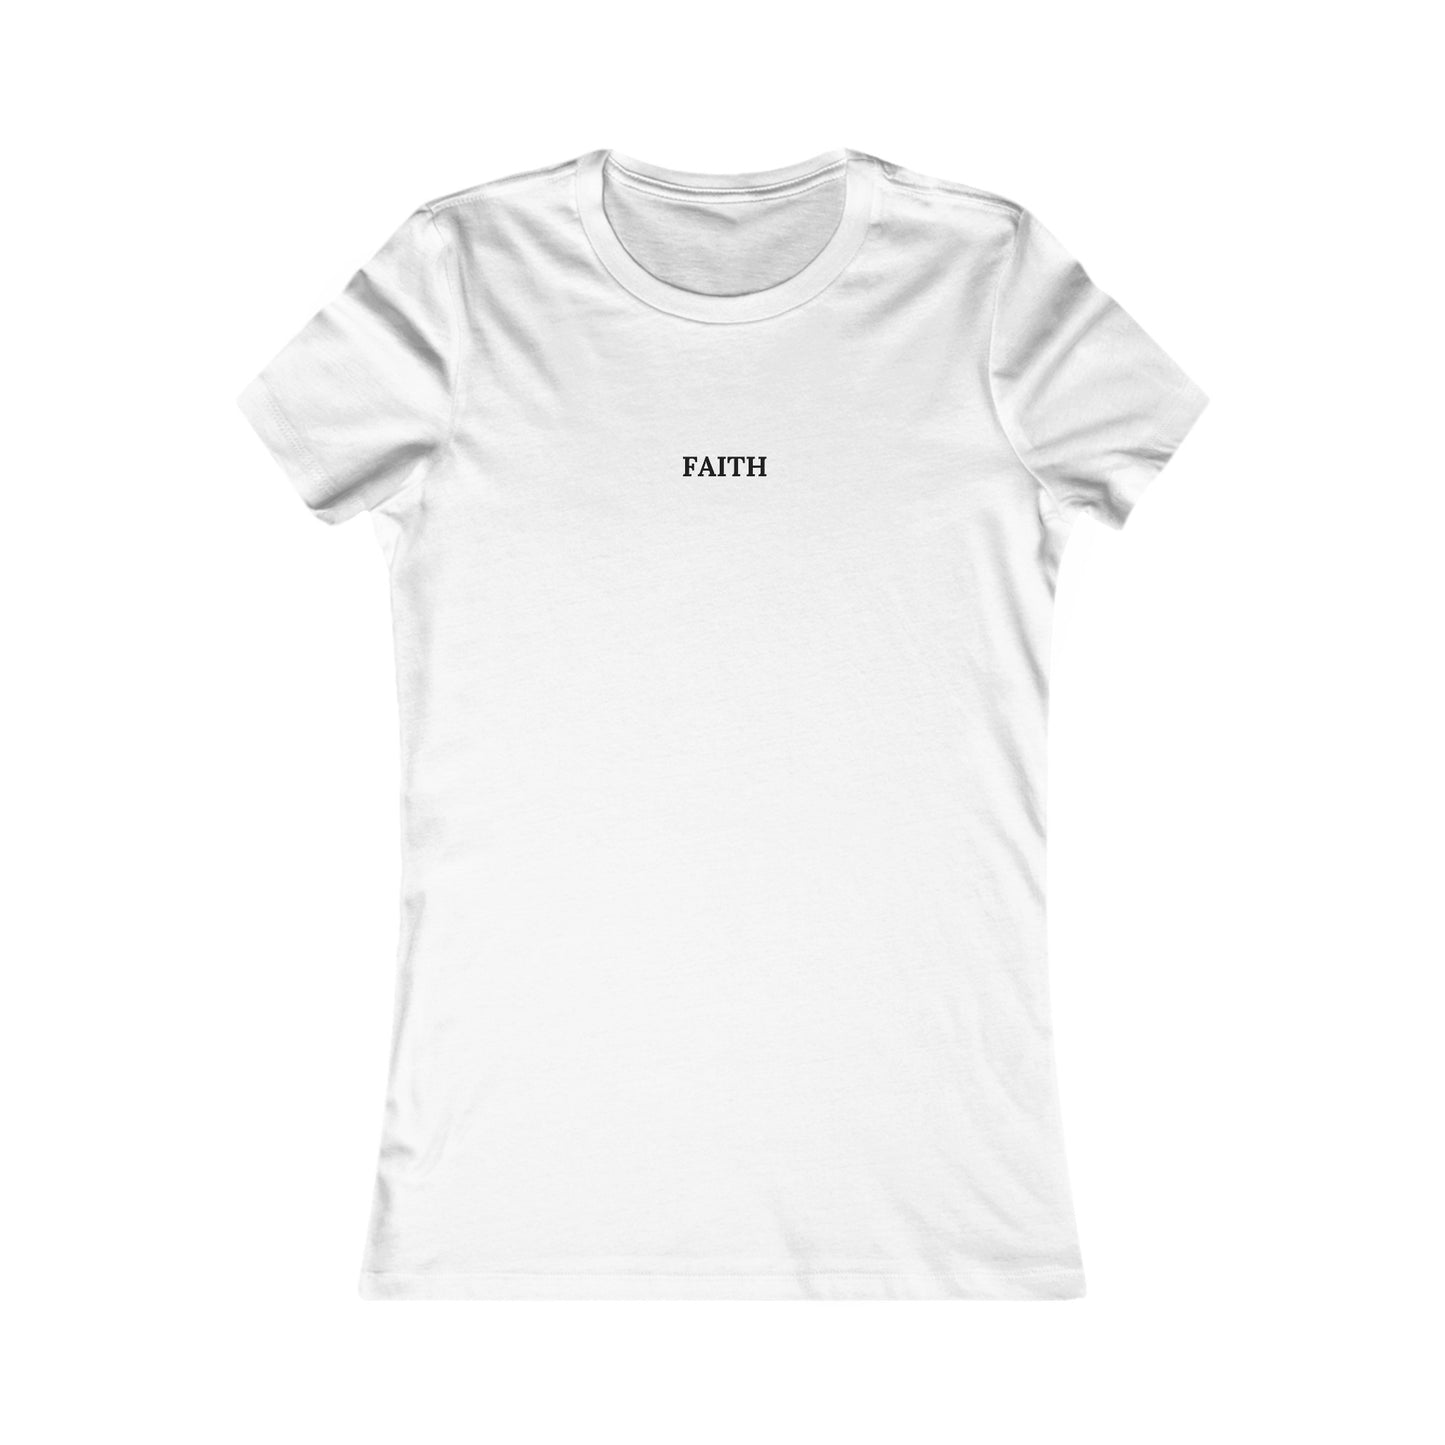 Have a Little Faith Women's Fitted Tshirt (Black Logo)